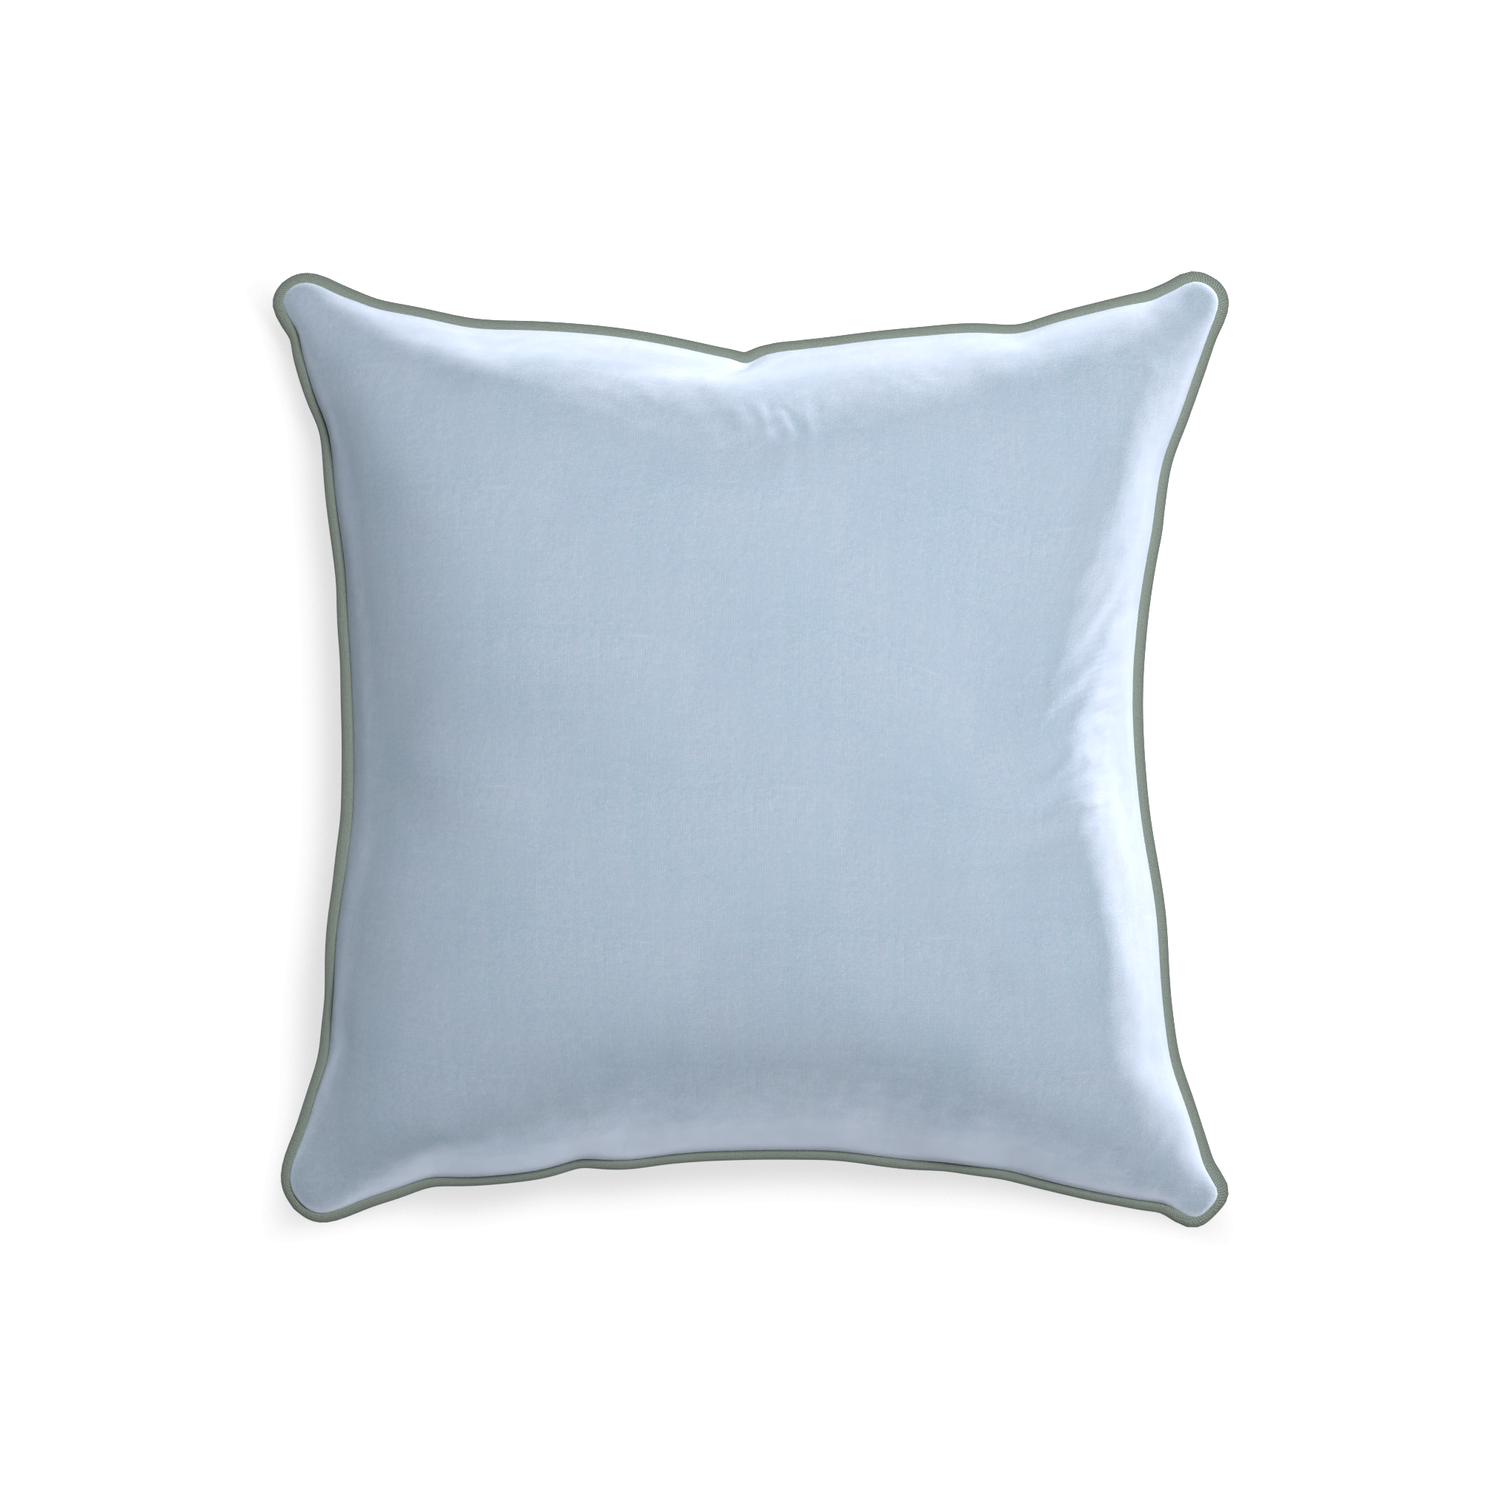 20-square sky velvet custom skypillow with sage piping on white background